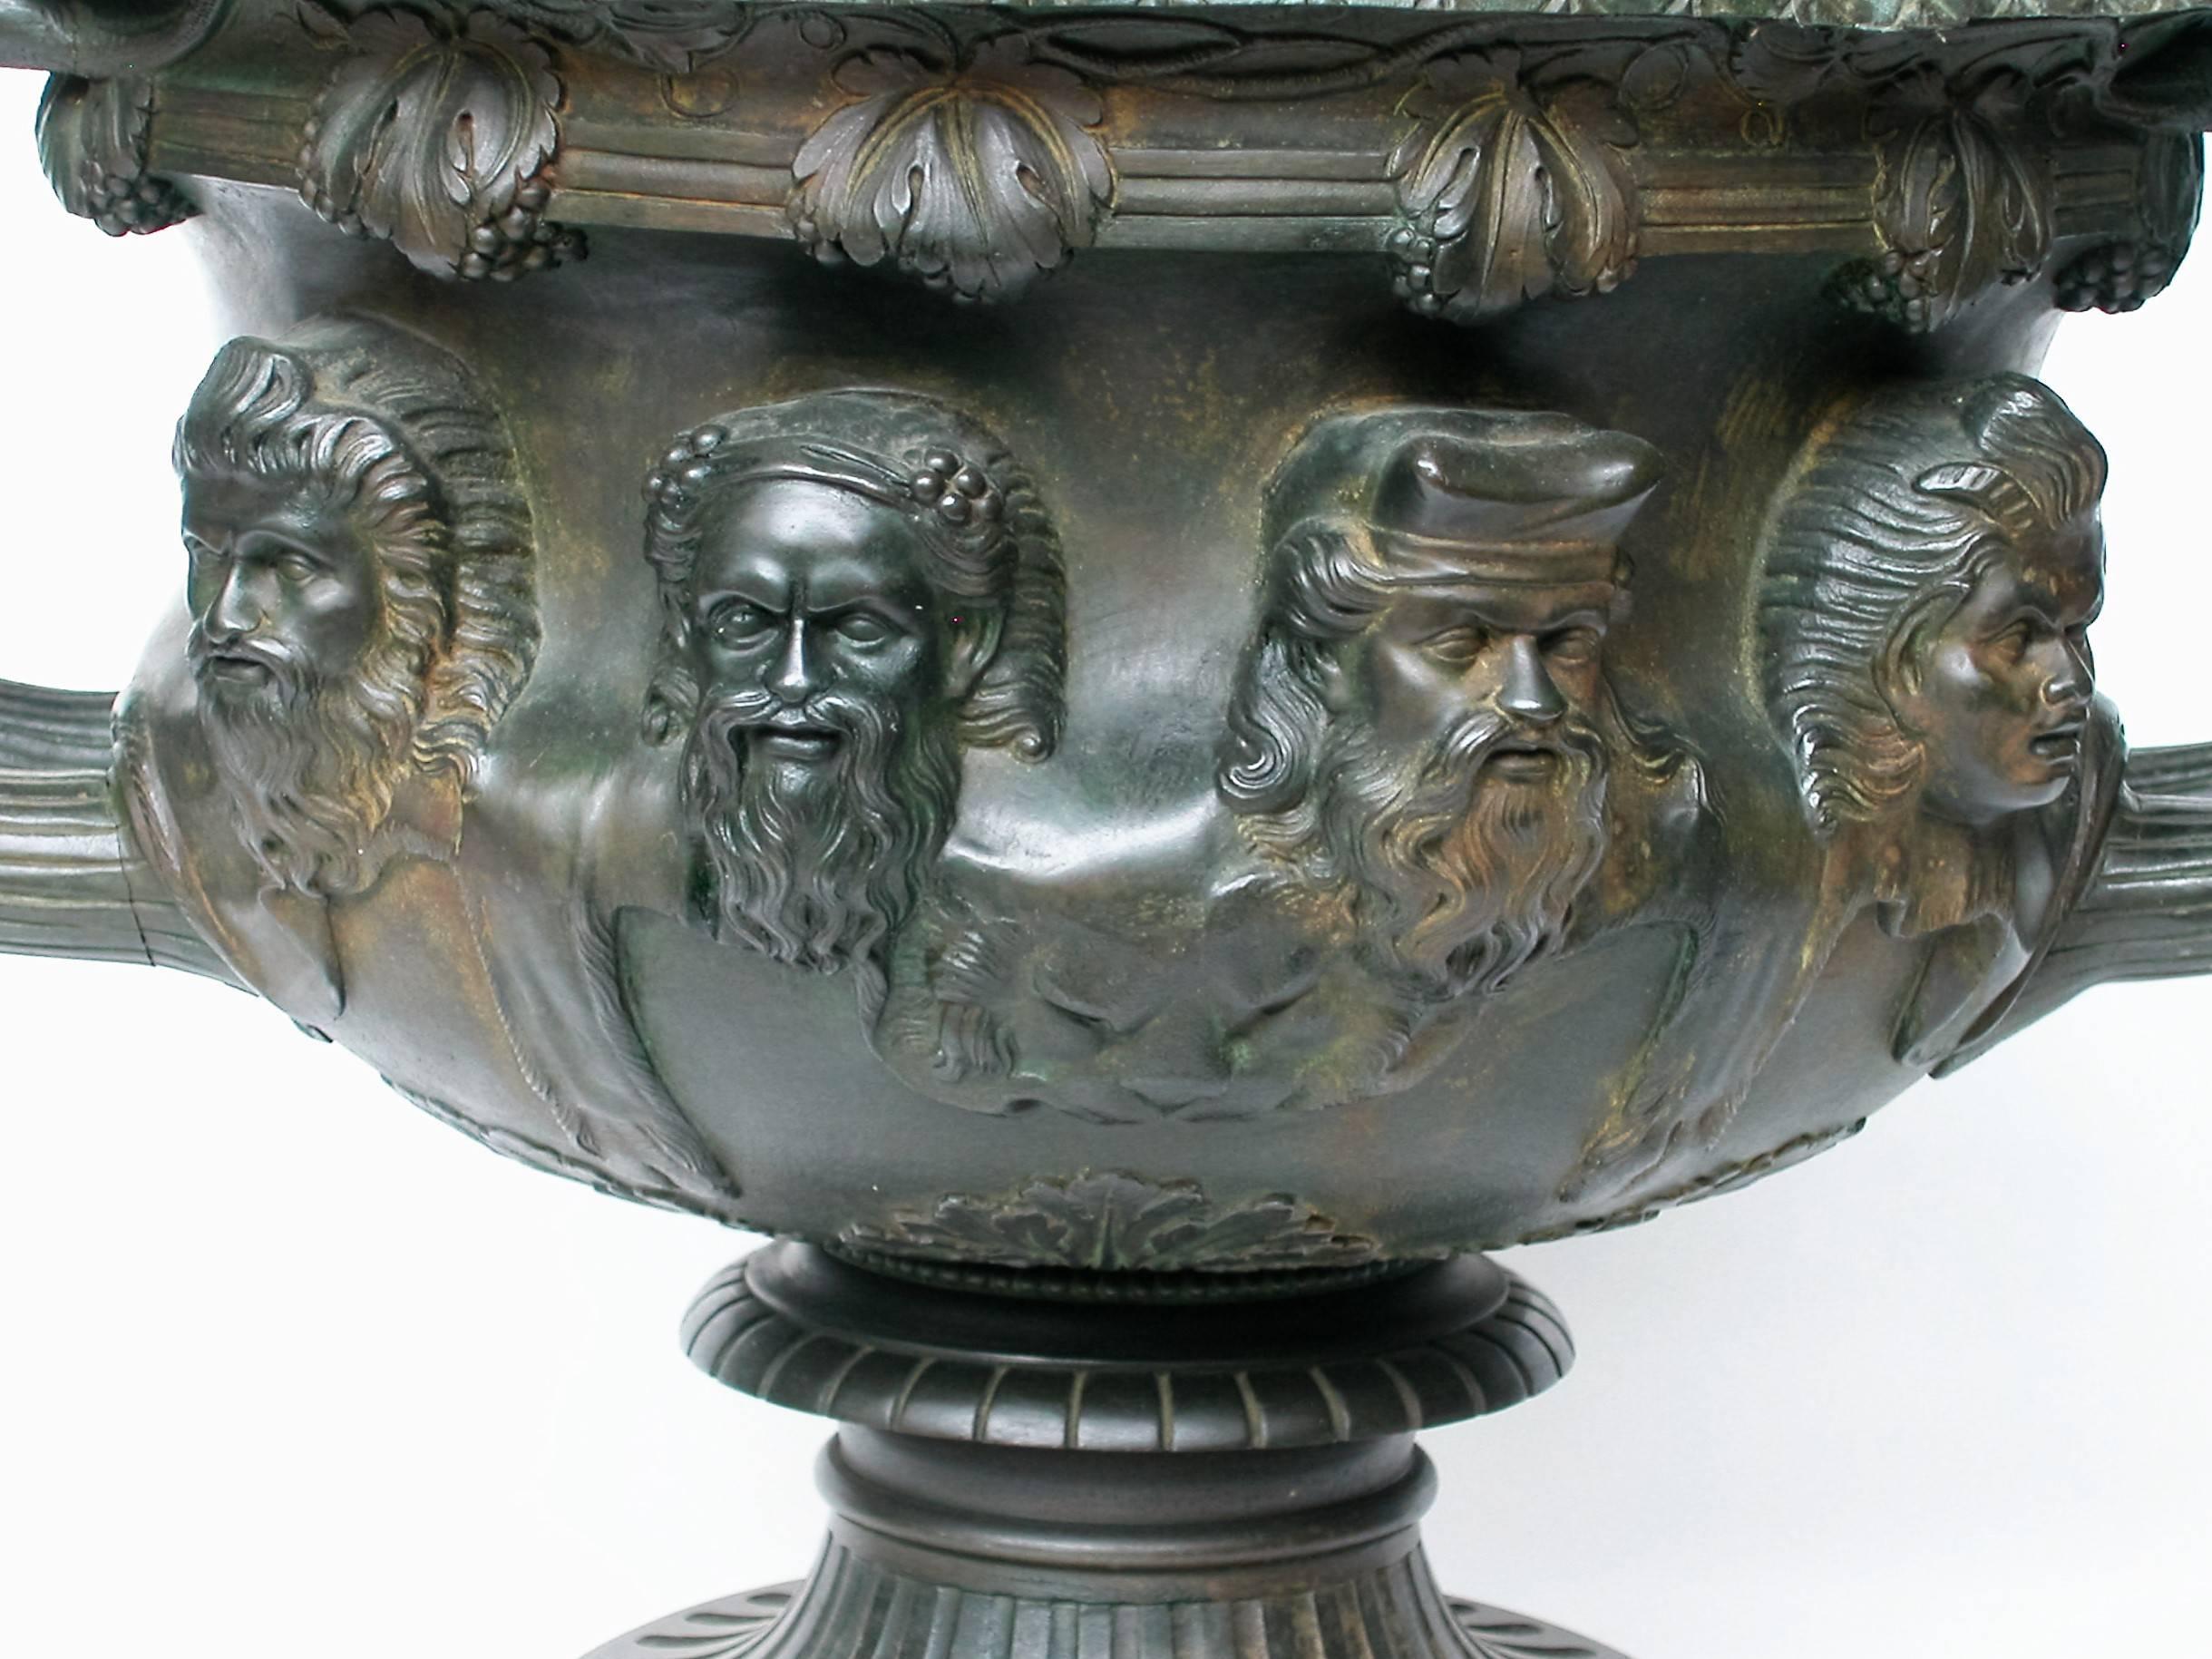 Monumental, antic Warwick vase in bronze.
The warwick vase is an ancient Roman marble vase with Bacchic ornament that was discovered at Hadrian's Villa, Tivoli about 1771 by Gavin Hamilton, a Scottish painter-antiquarian and art dealer in Rome. The